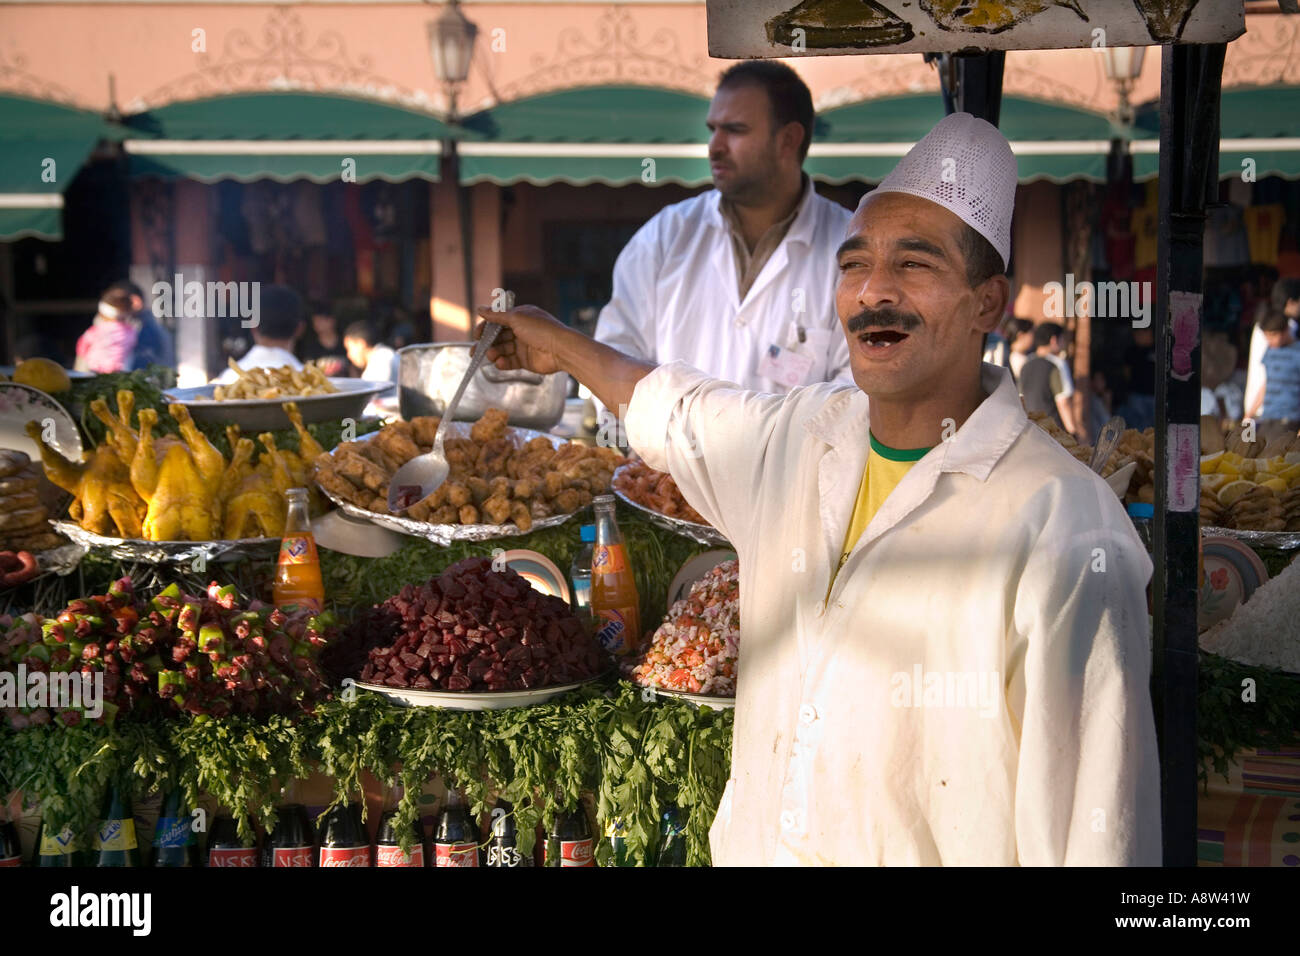 Chef selling spicy food in Jemaa El Fna Square in Marrakech Stock Photo